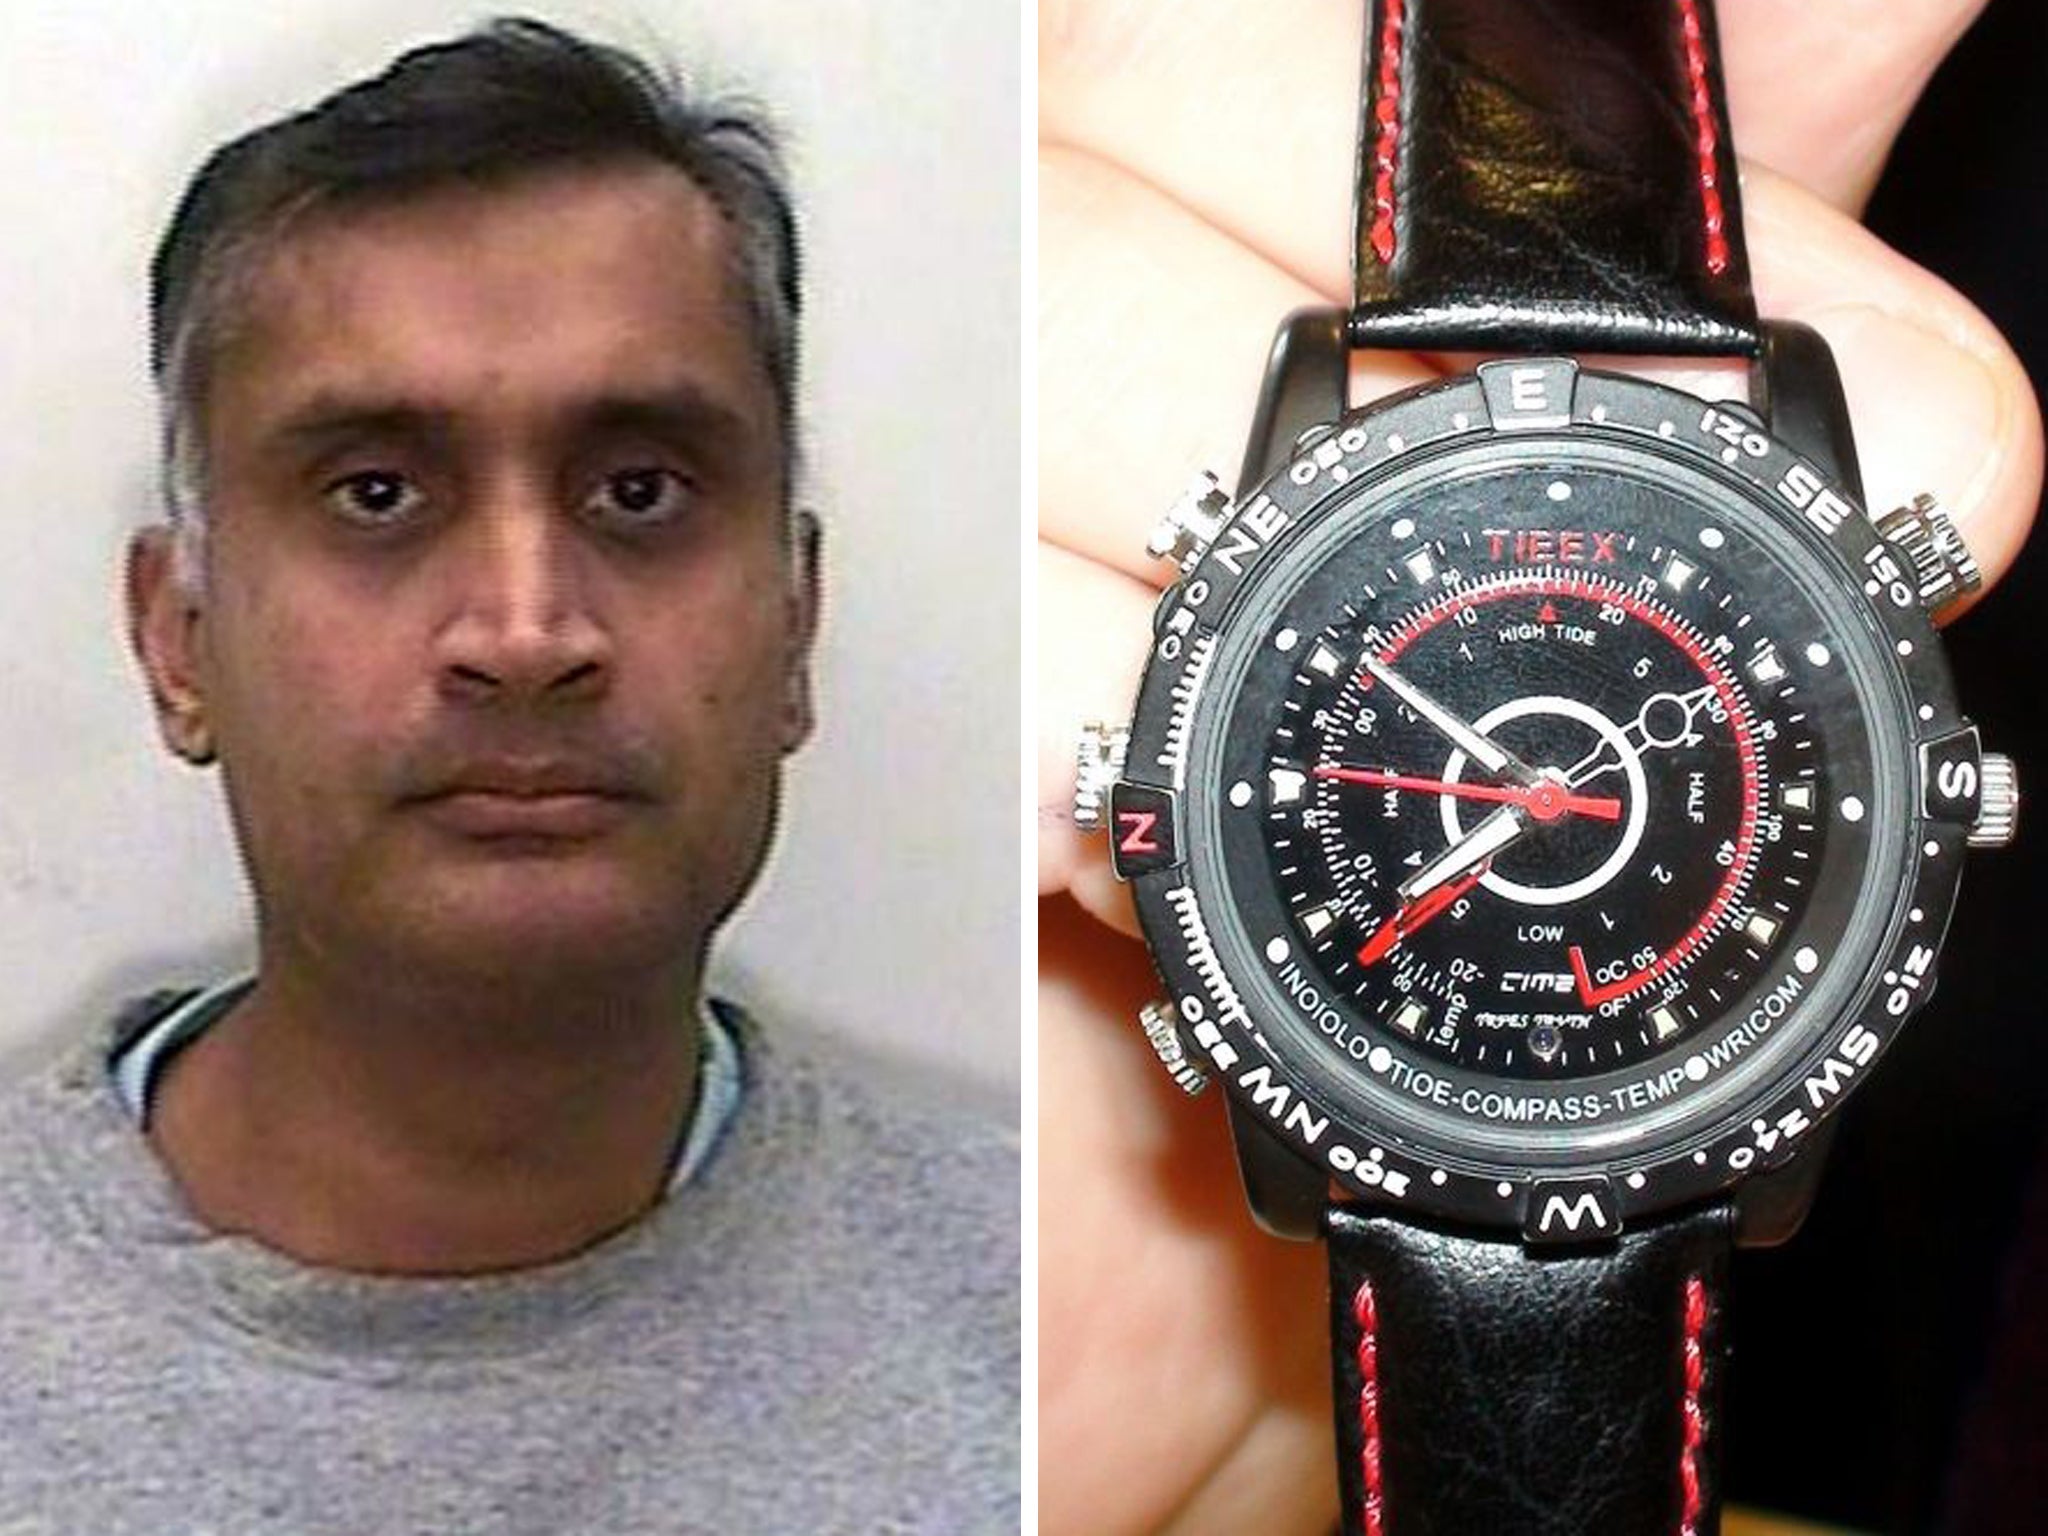 Dr Davinderjit Bains used a hidden camera inside a hi-tech watch to film abuse on female patients